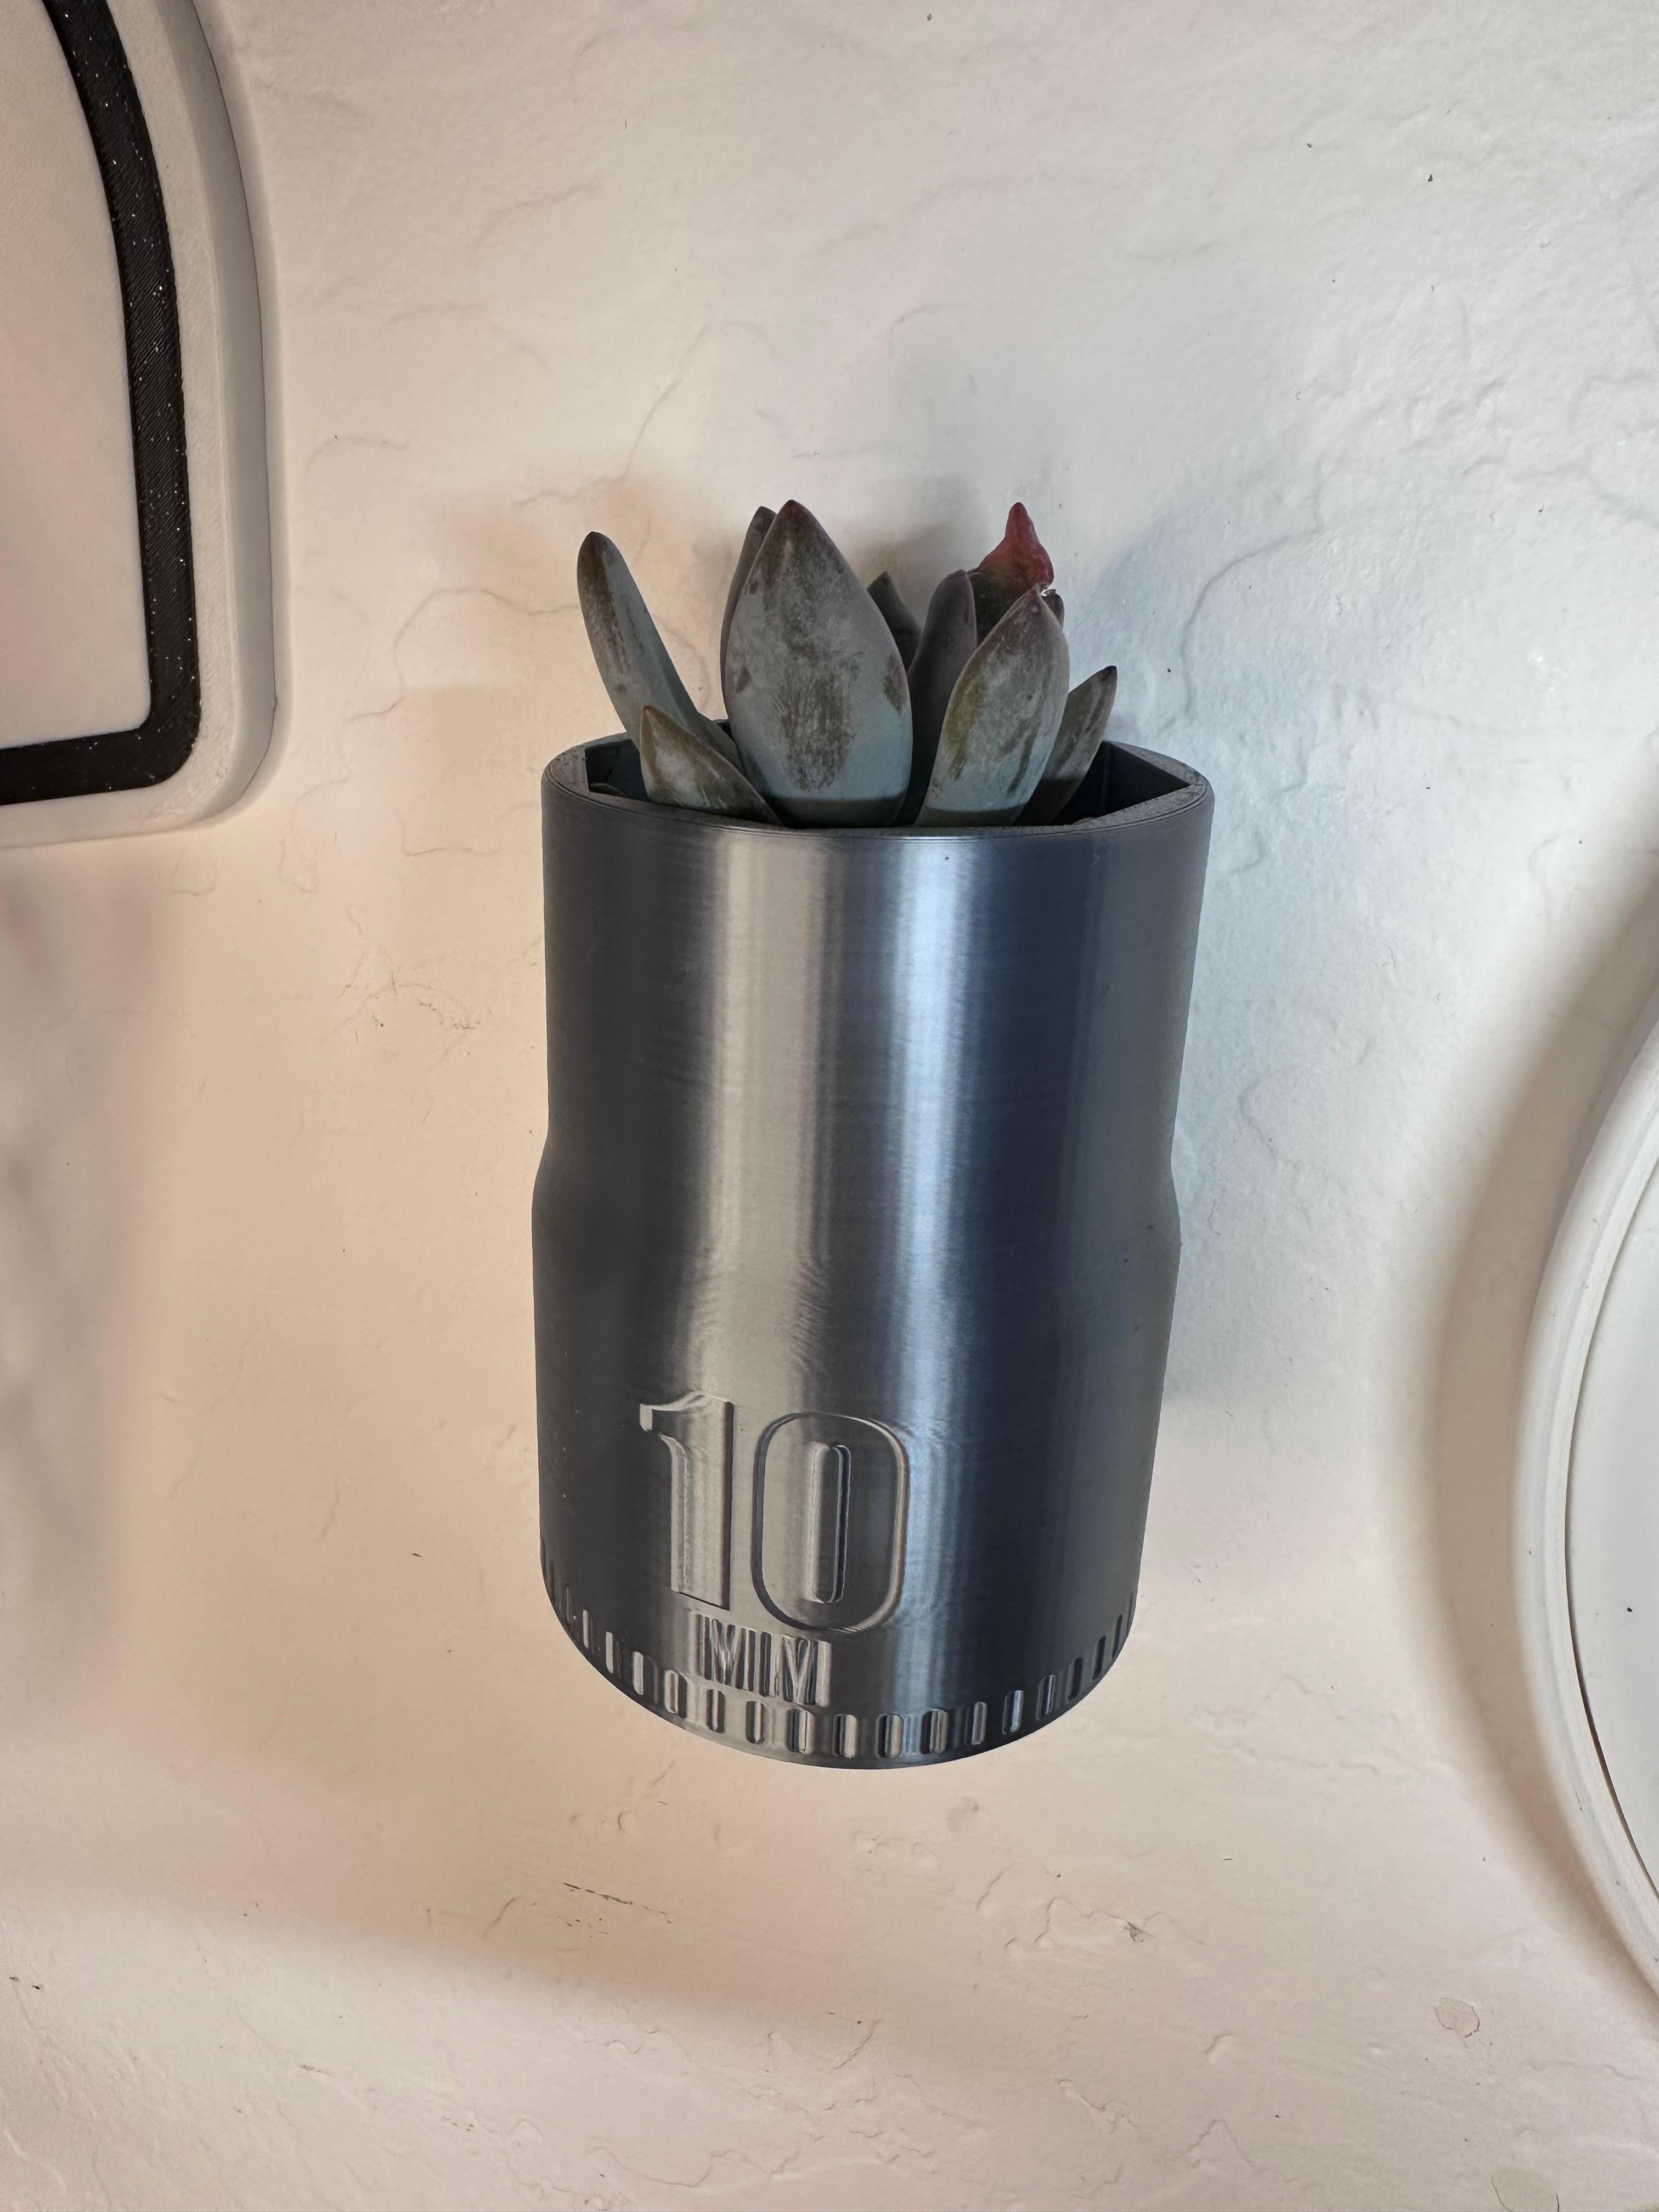 [LOST] 10mm Succulent wall mounted planter, for him, for the shop, for the office, fathers day 3d model